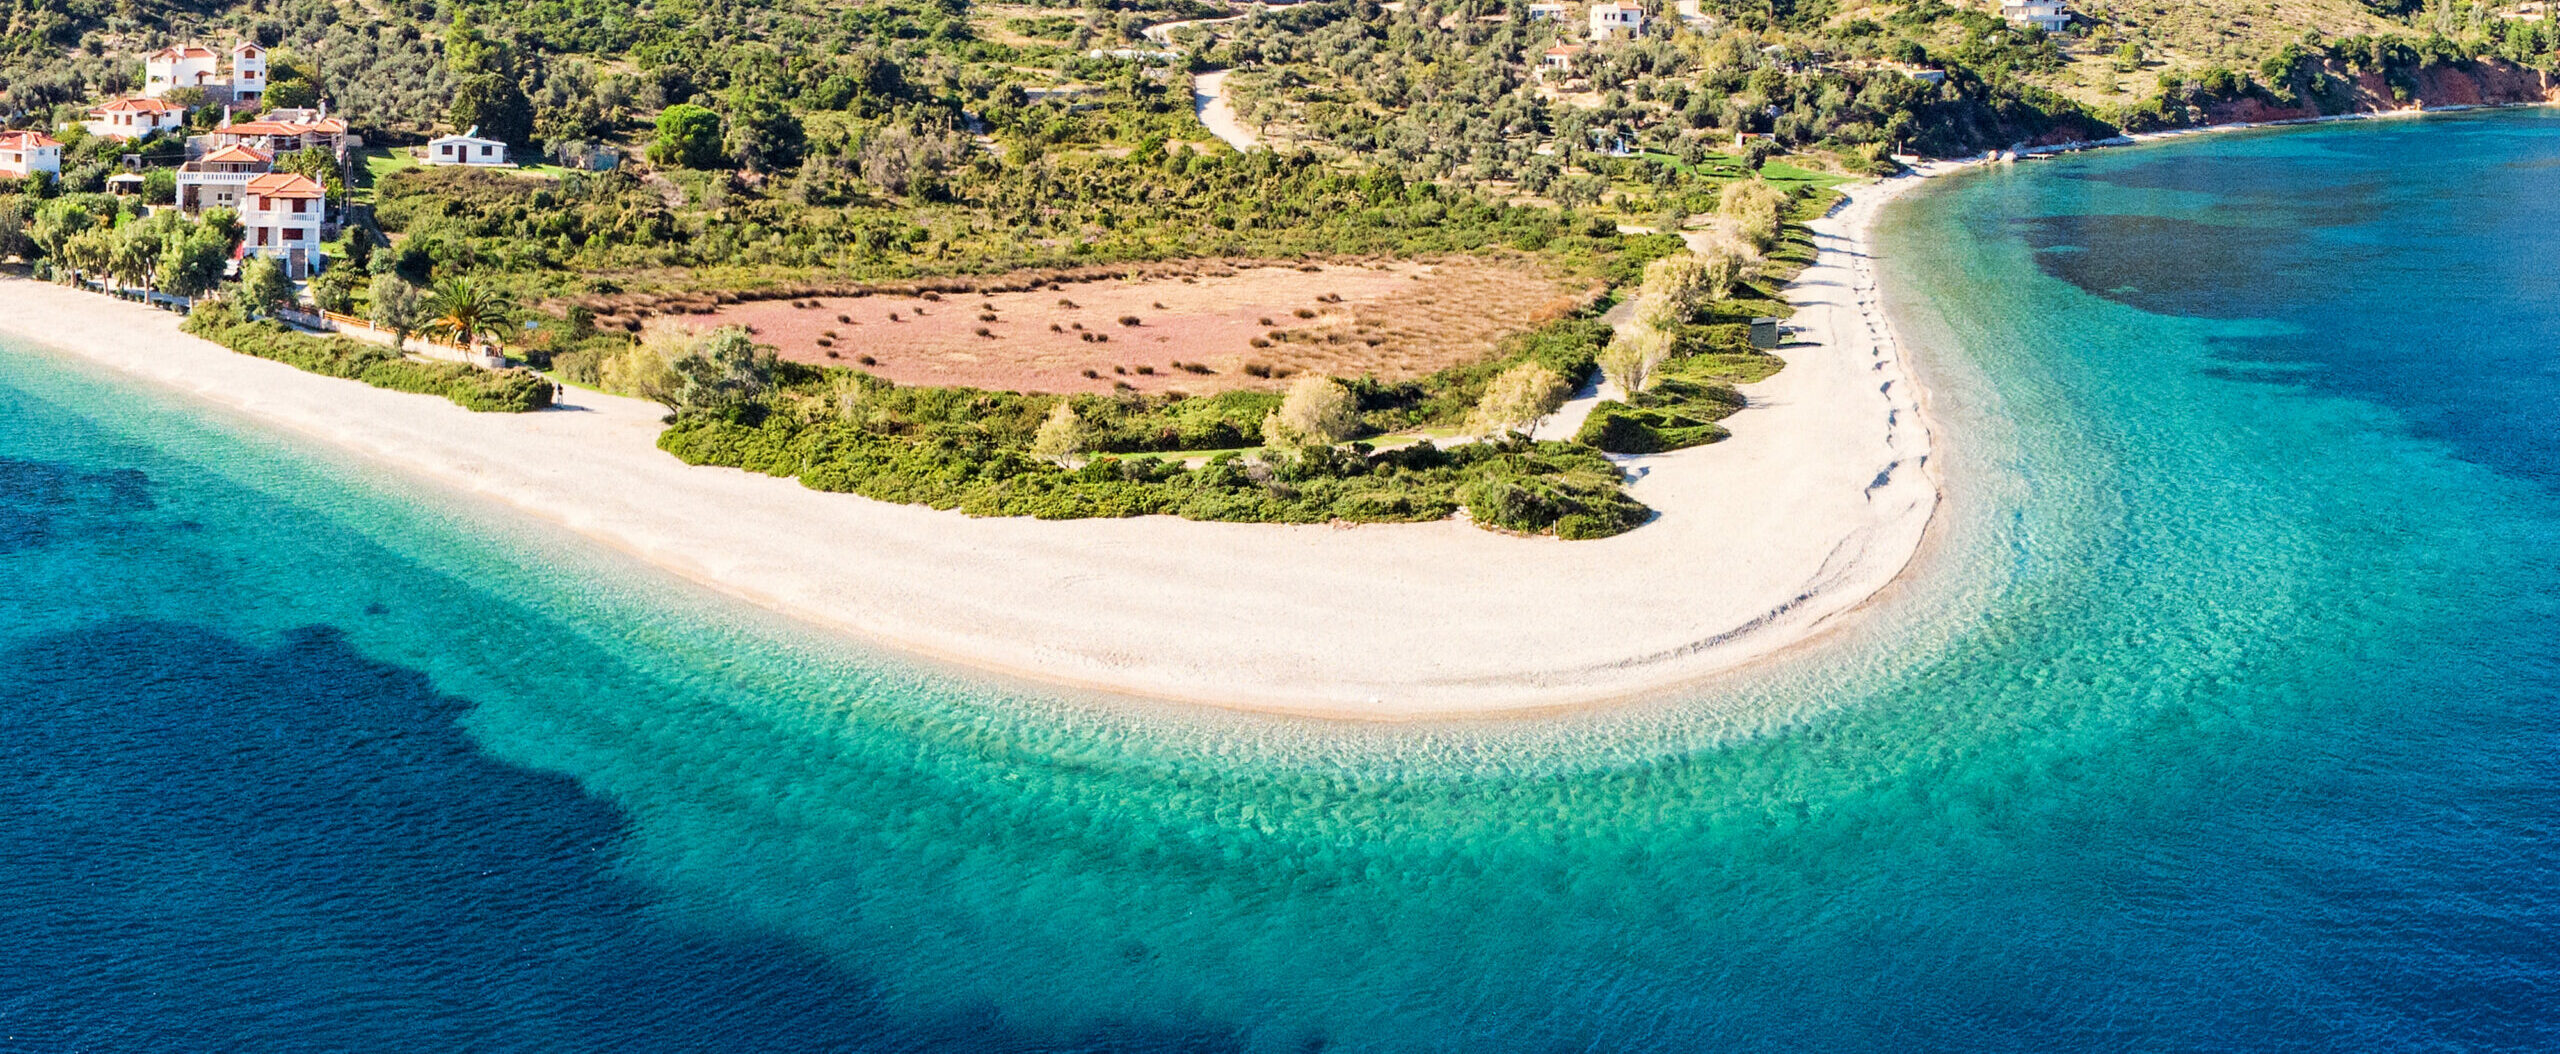 An ideally remote, exotic beach on Alonnisos